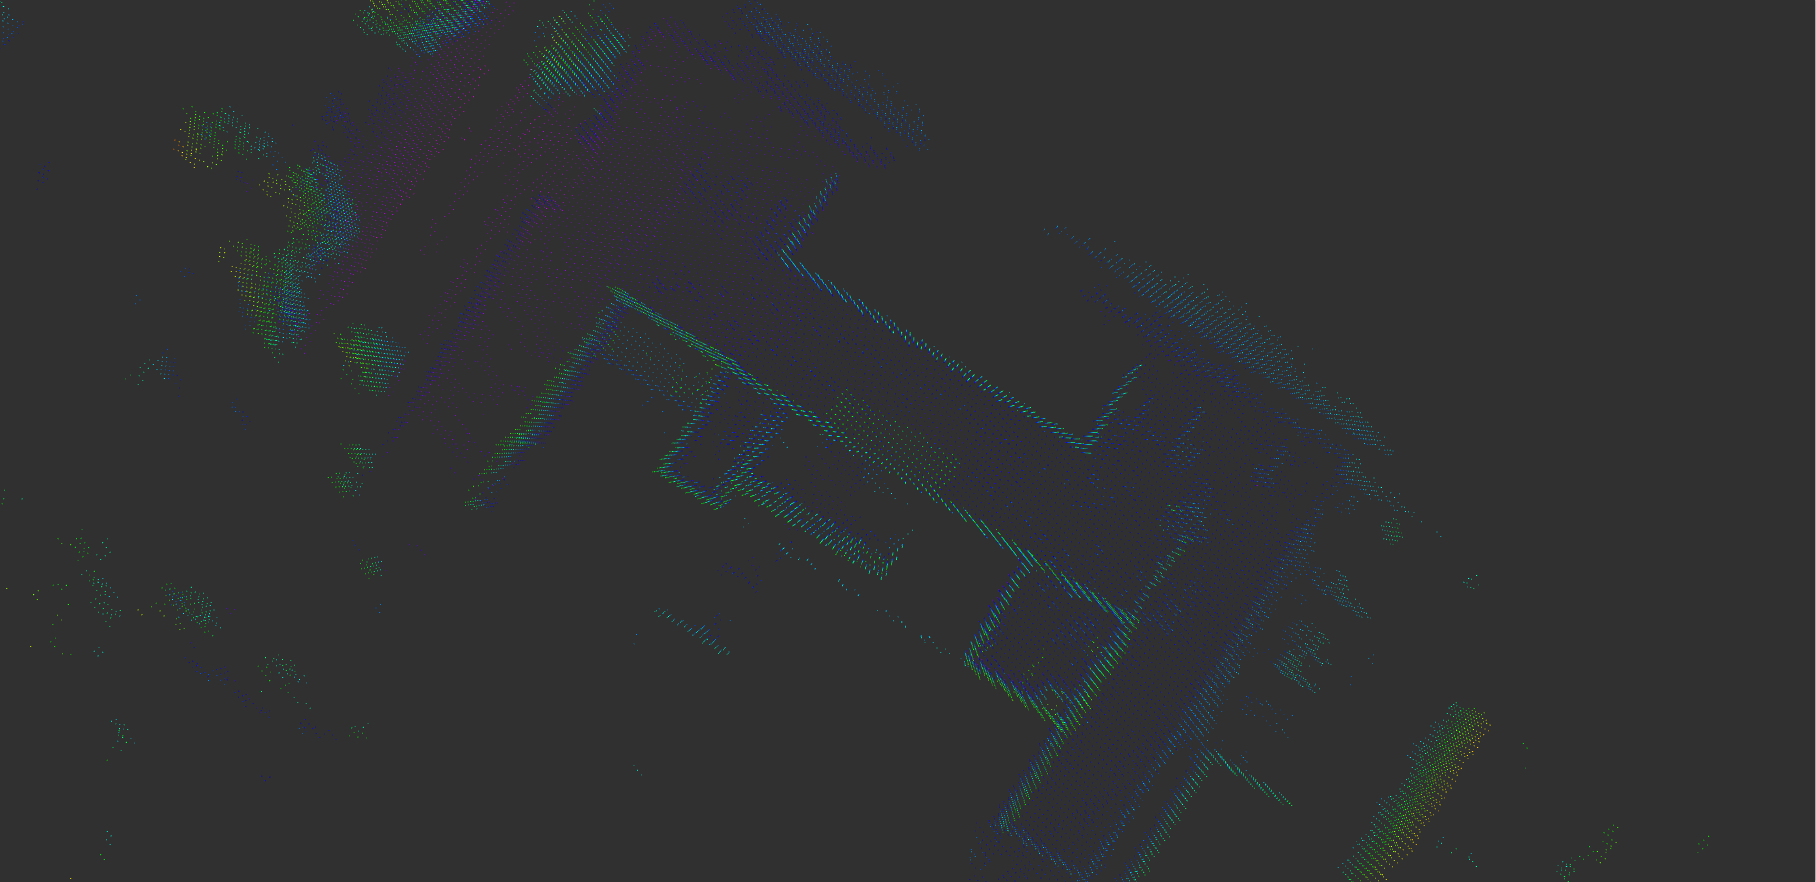 _images/outdoor_pointcloud.png